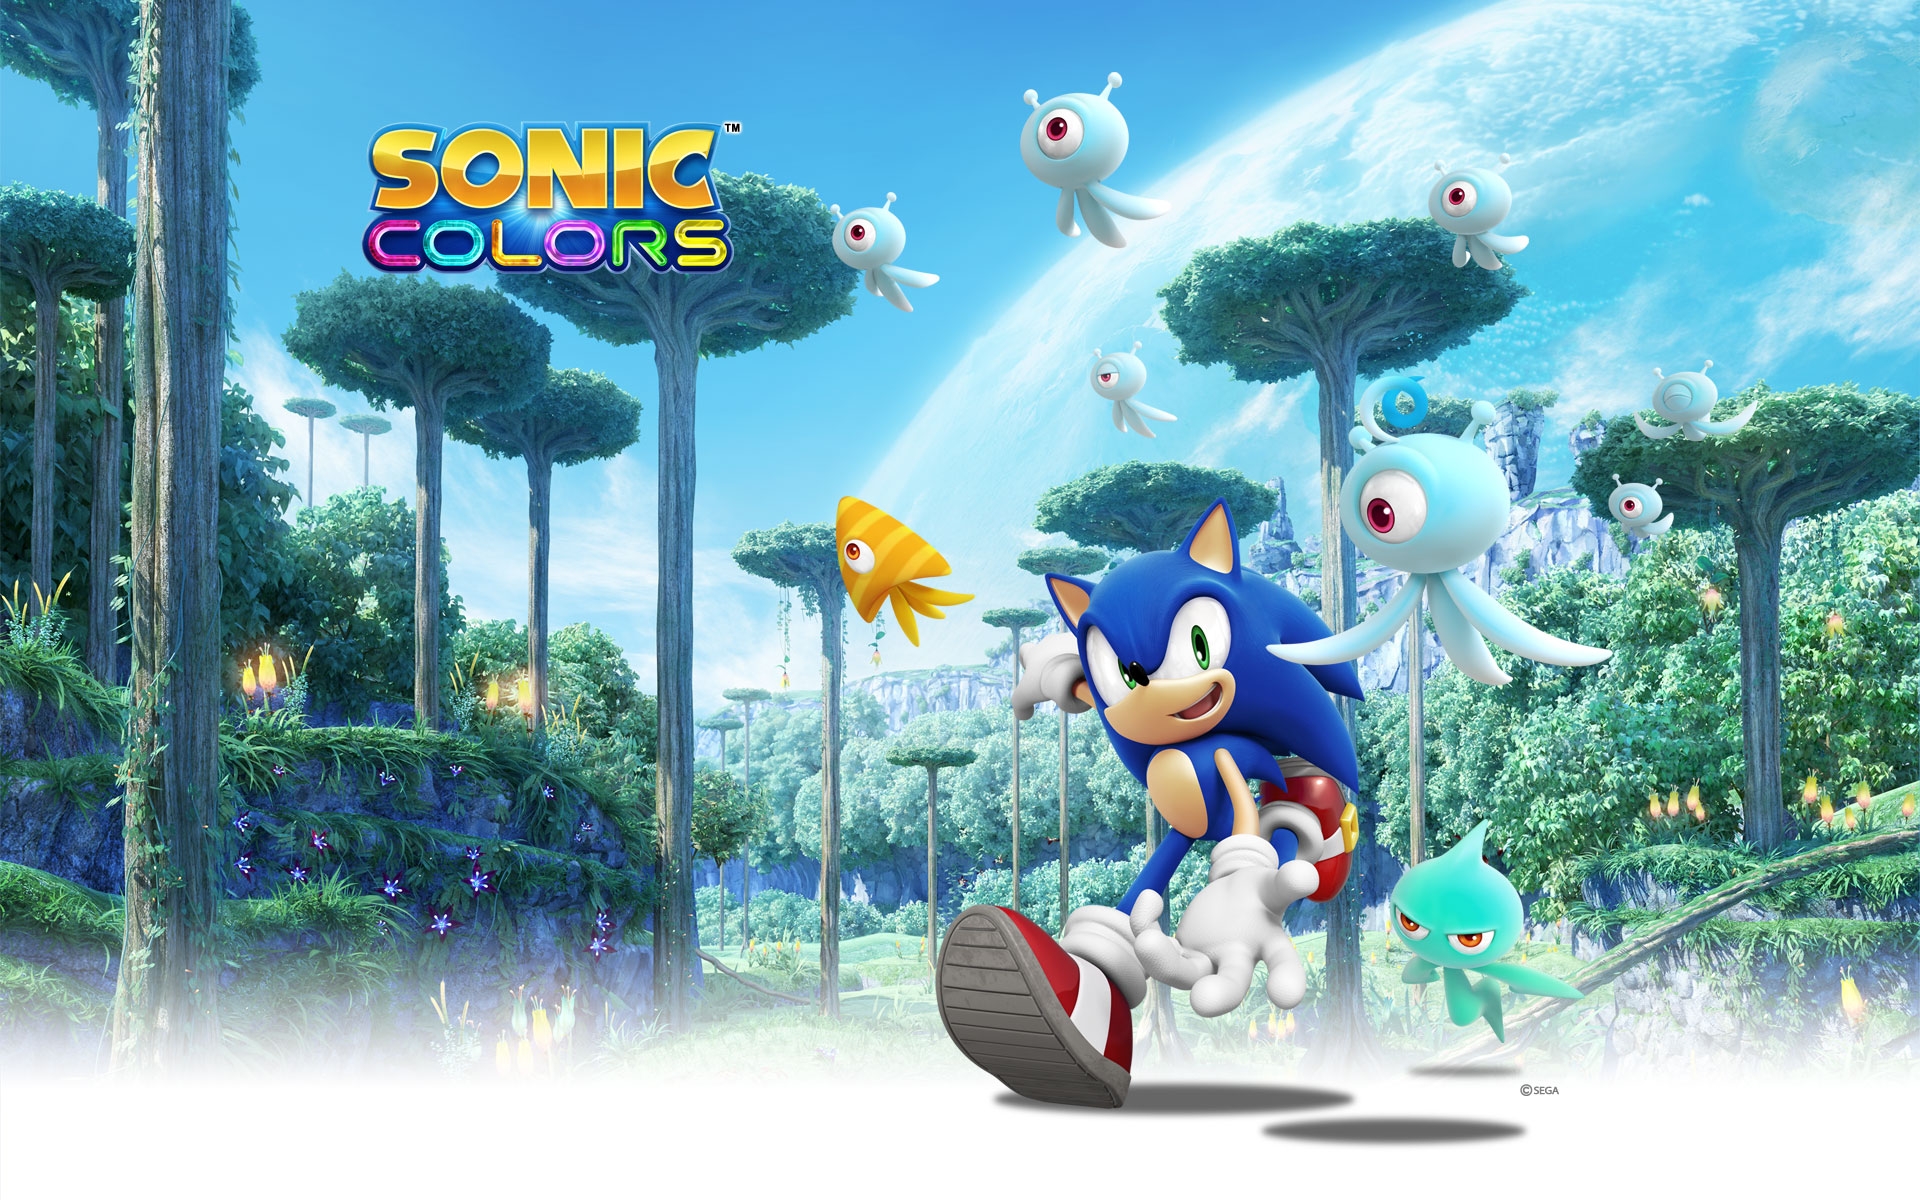 sonic, video game, sonic colors, sonic the hedgehog